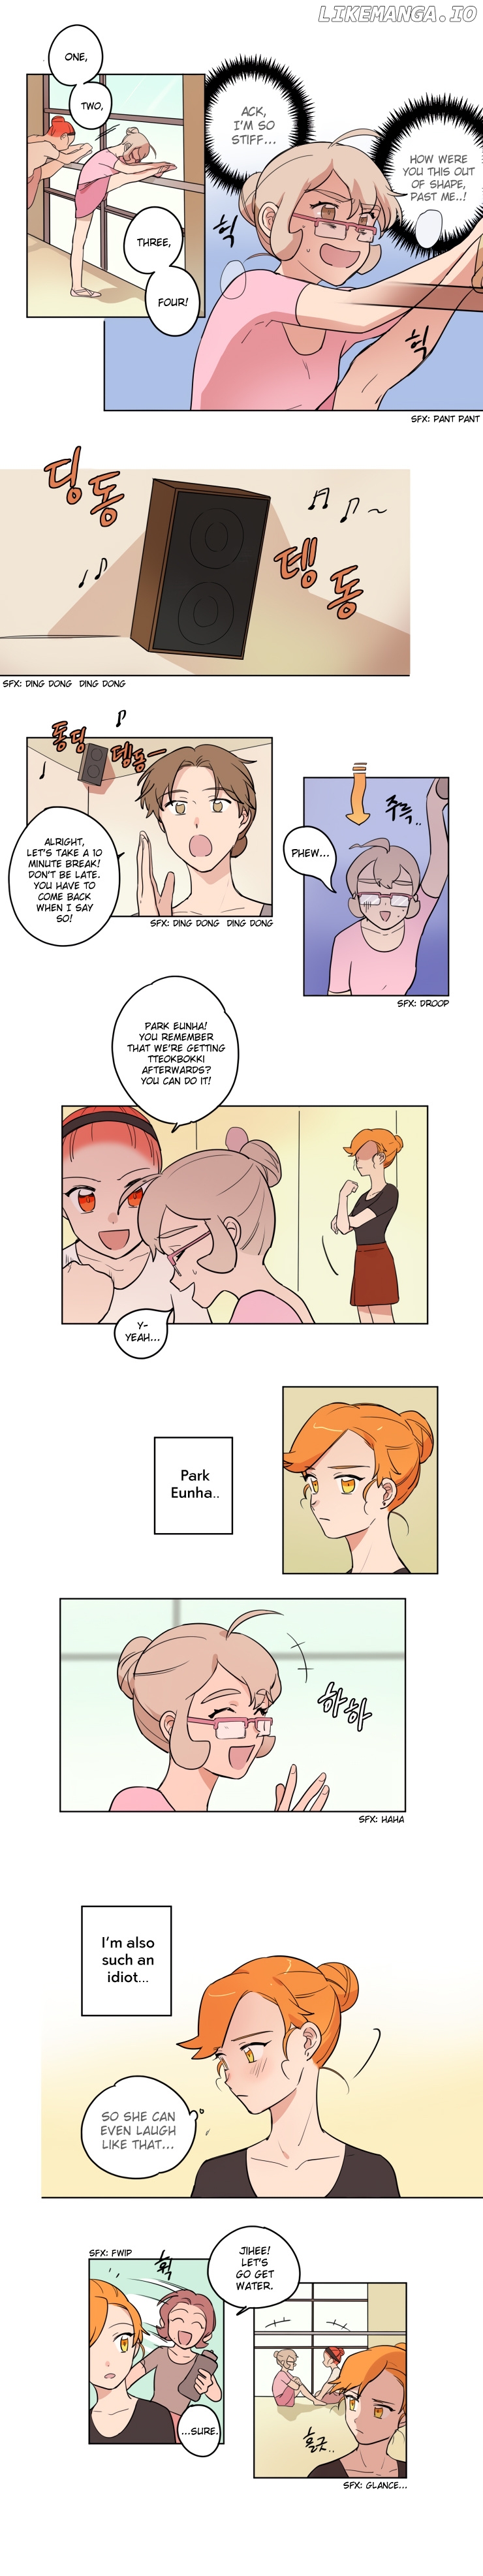 Dance of the Sugar Plum Fairy chapter 4 - page 2